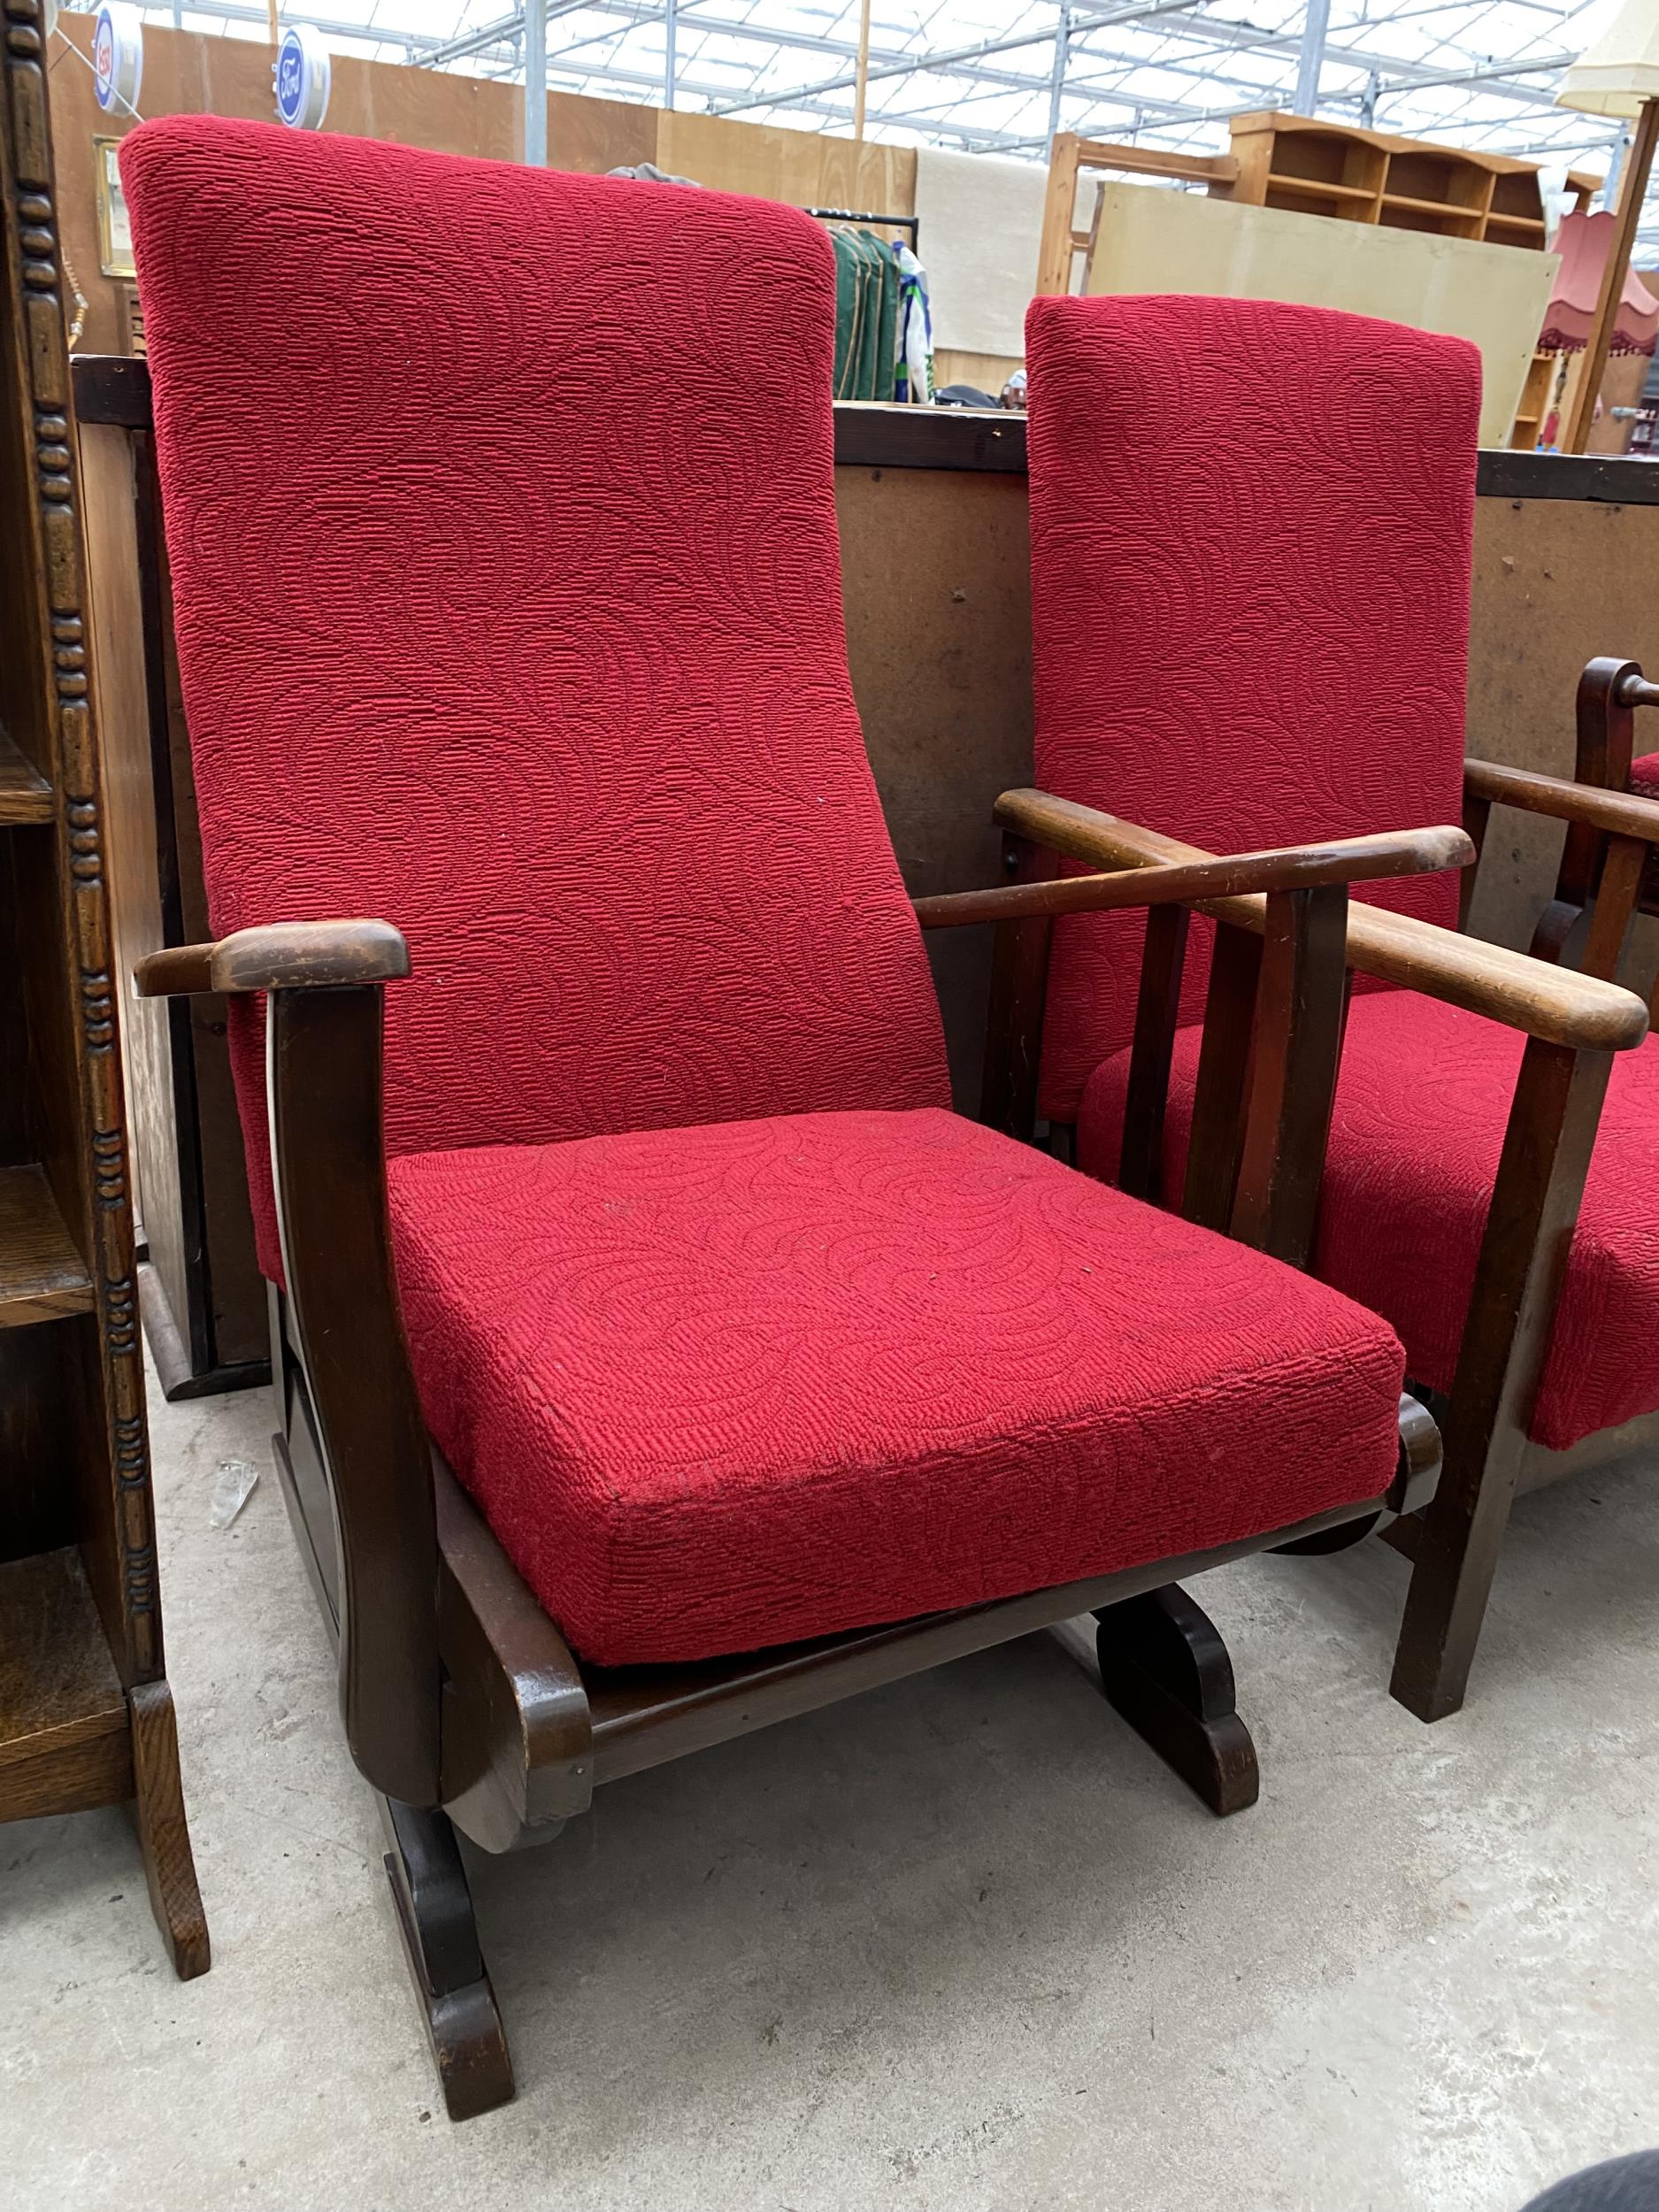 A MID 20TH CENTURY ROCKING CHAIR AND SIMILAR RECLINER - Image 2 of 3